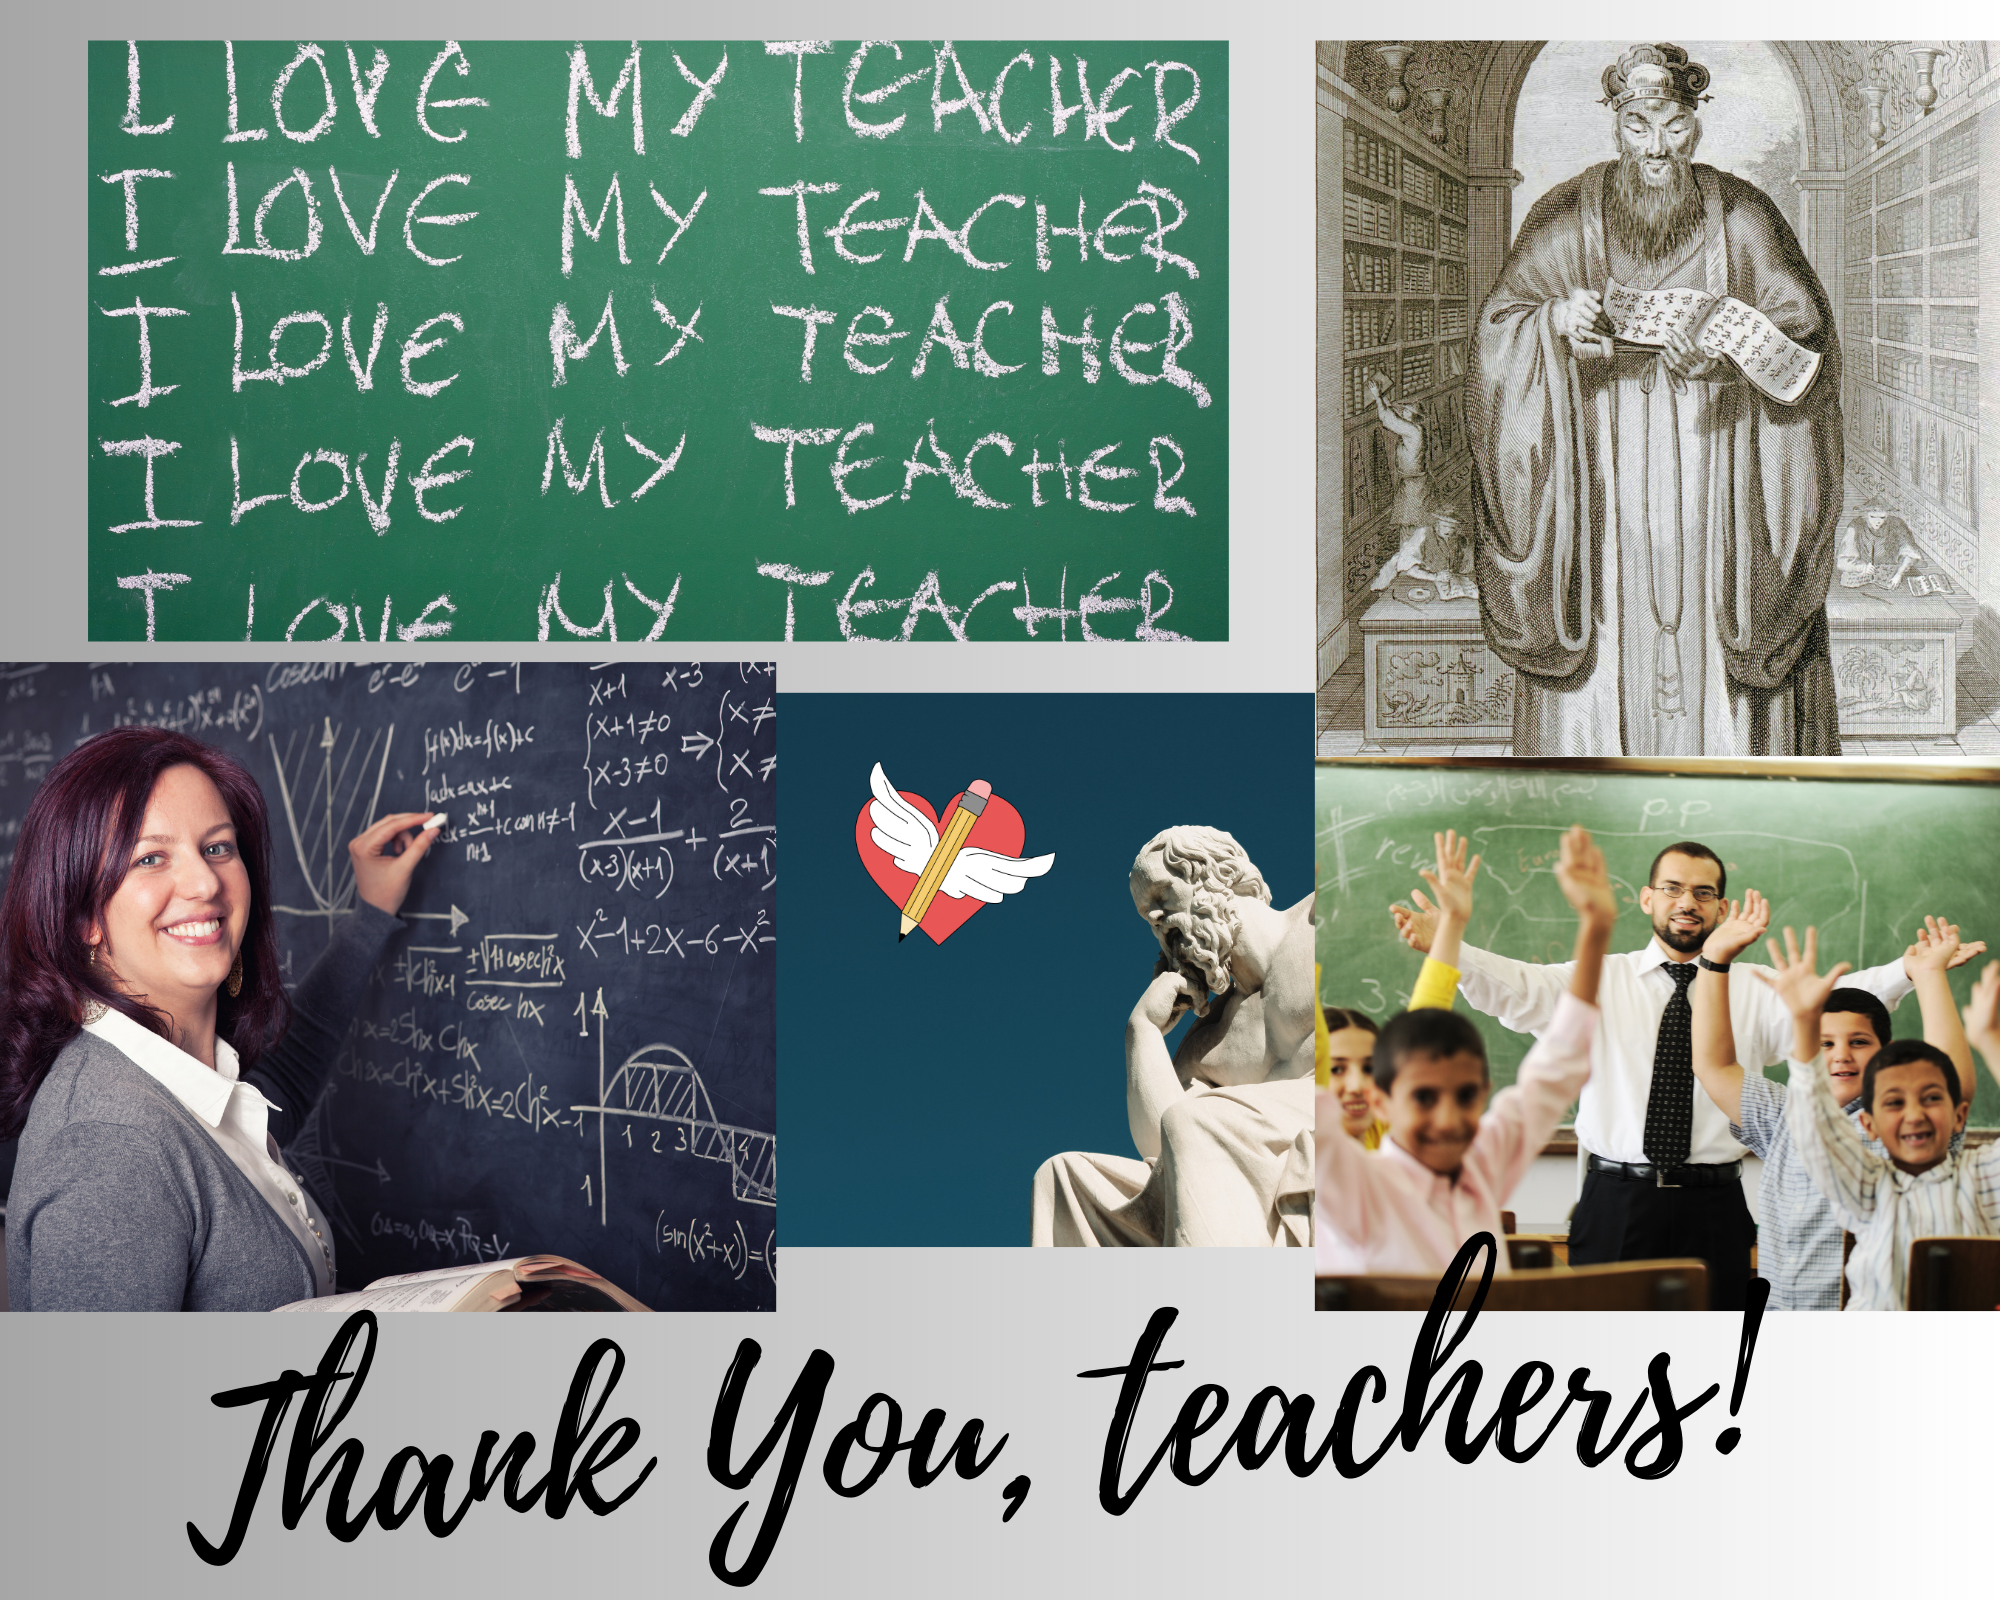 Thank you, Teachers! The Top 5 Best Teacher Quotes from the last 25 Centuries